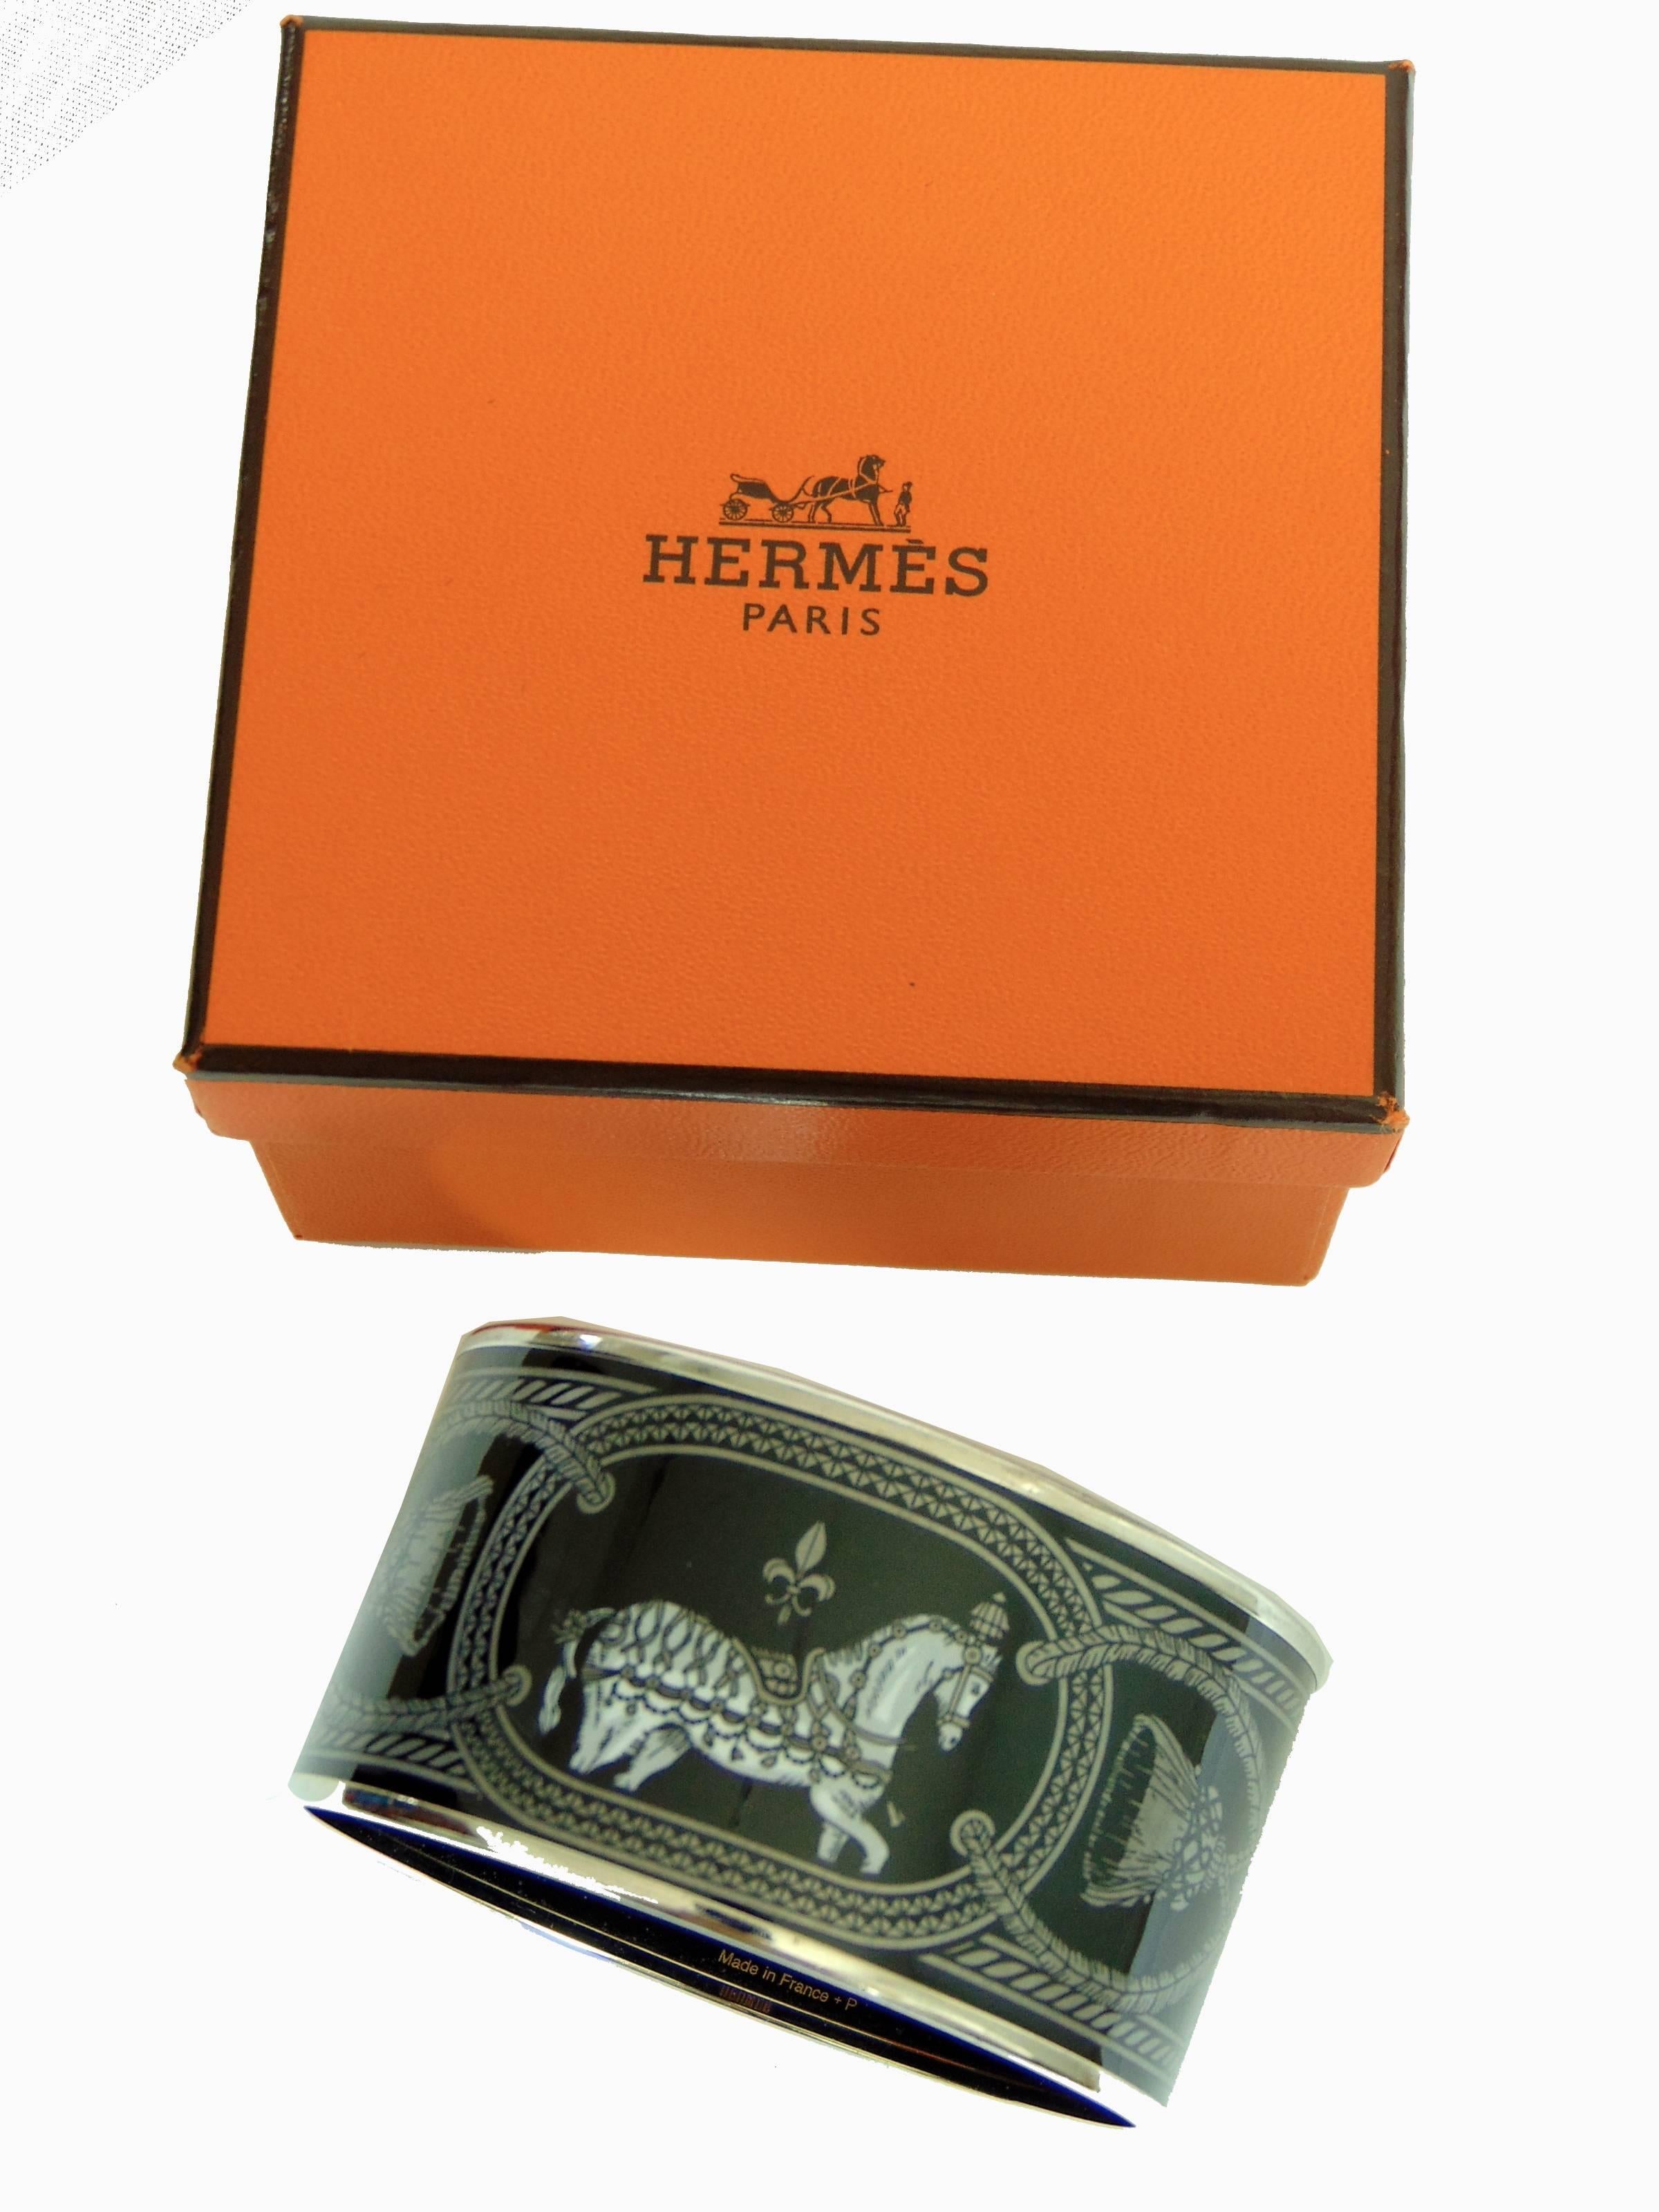 Here's a delightful printed enamel bracelet from Hermes, from 2014.  In black and silver colorway, it's in excellent condition overall with only minor scratching to silver from prior wear, hard to see unless very closely inspecting.  Size 70, this